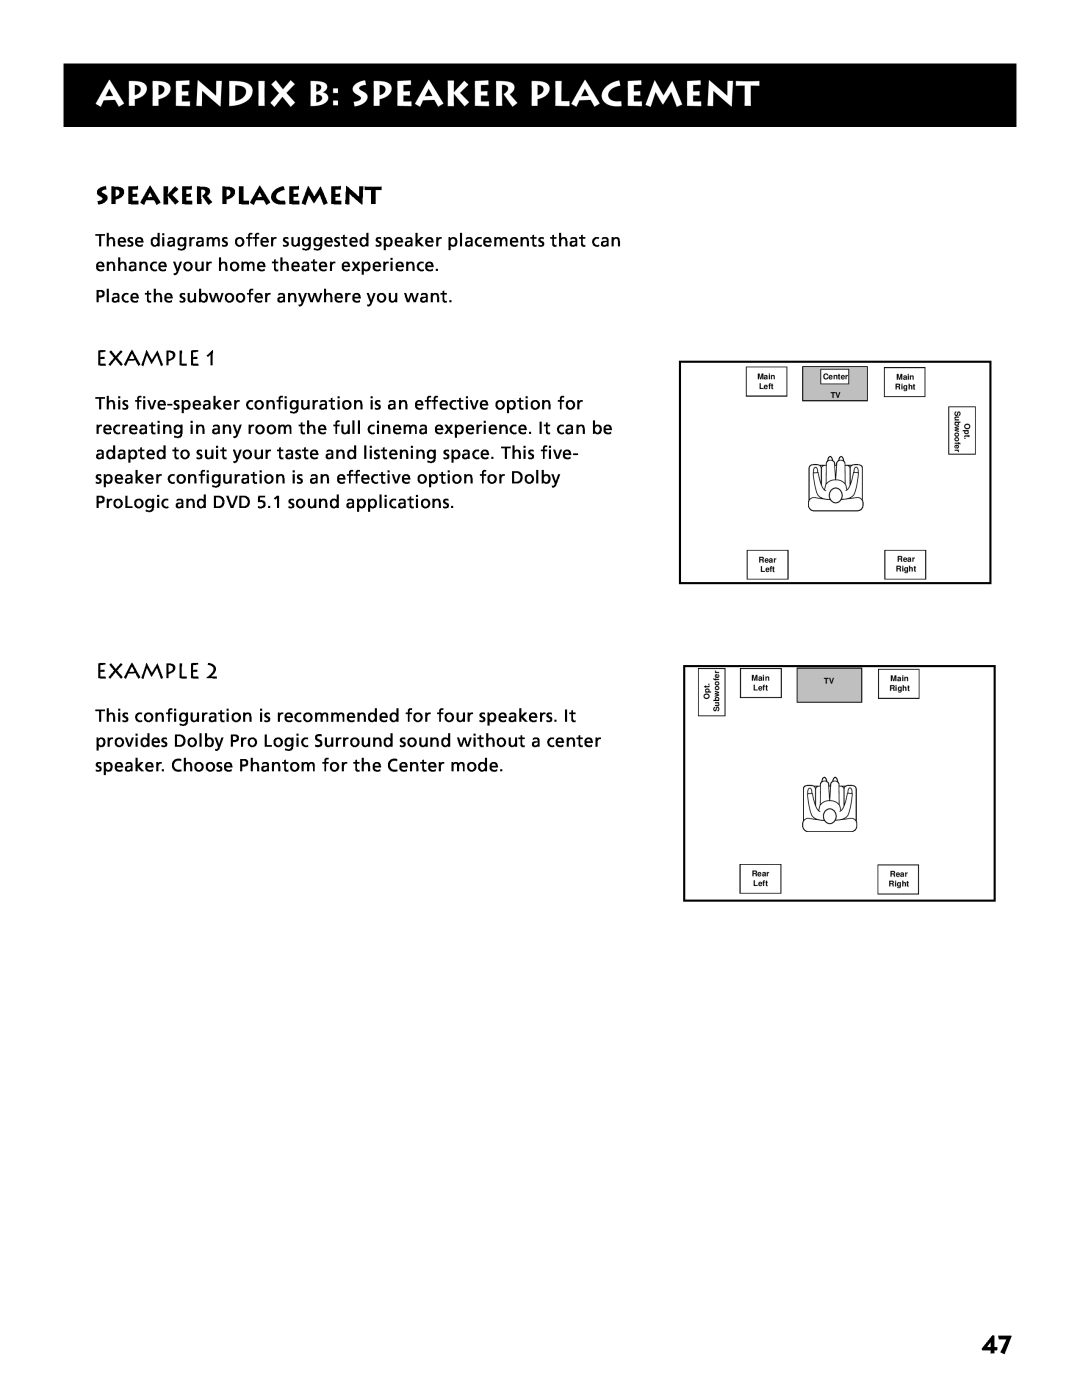 Electrohome RV-3798 manual Appendix B: Speaker Placement, Example 